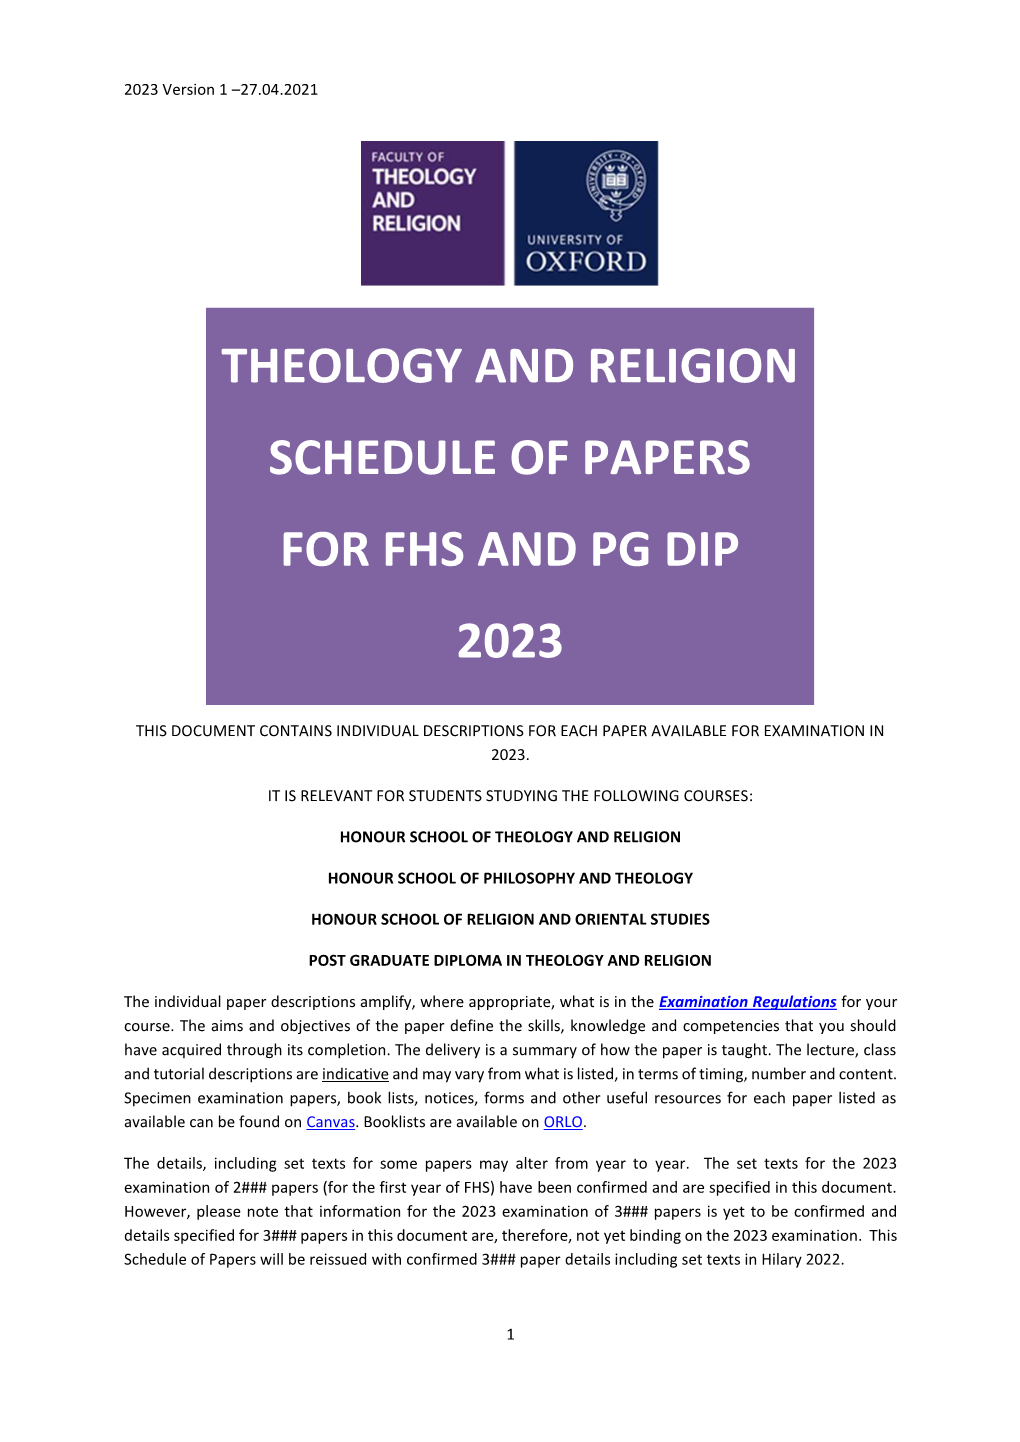 Theology and Religion Schedule of Papers for Fhs and Pg Dip 2023